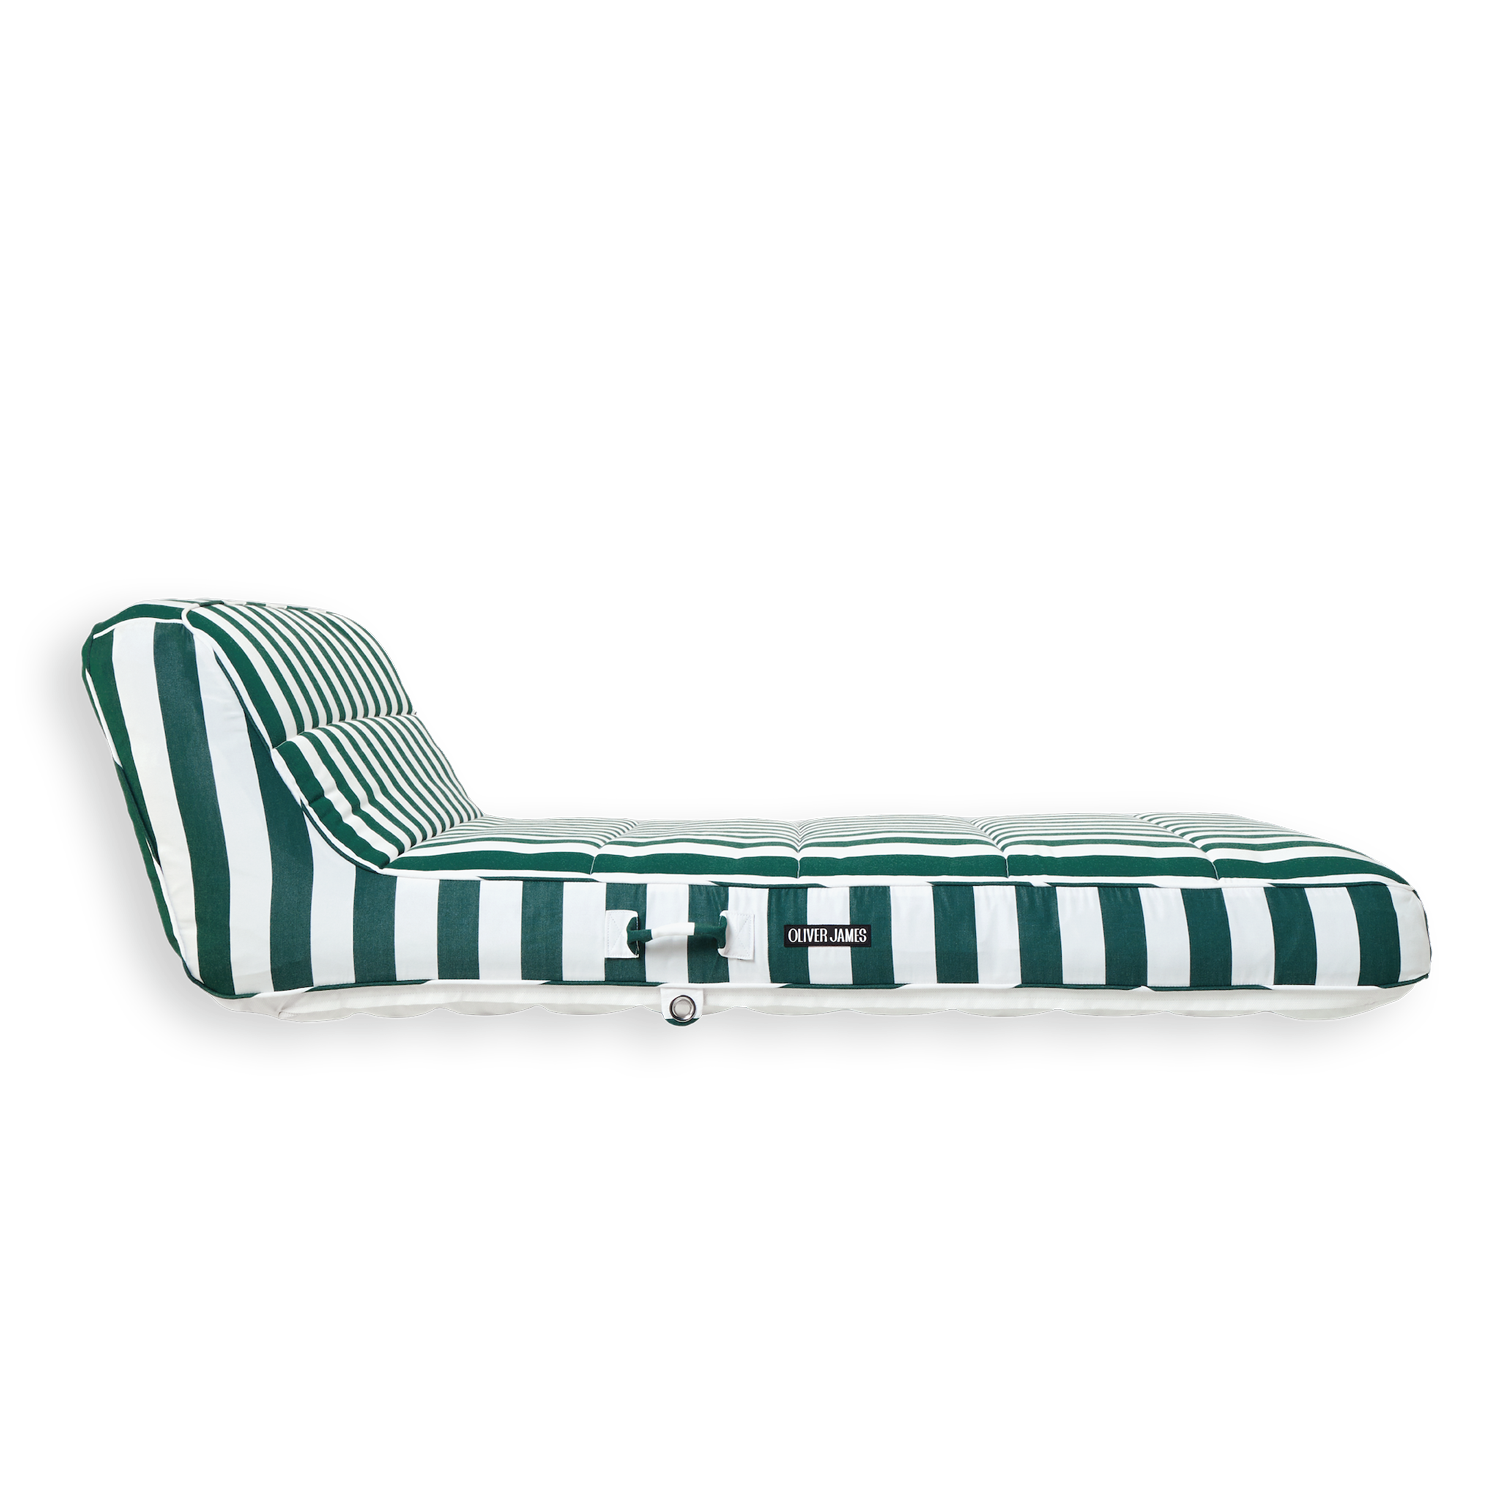 The side profile and backrest angle of a double green and white stripe luxury pool float.